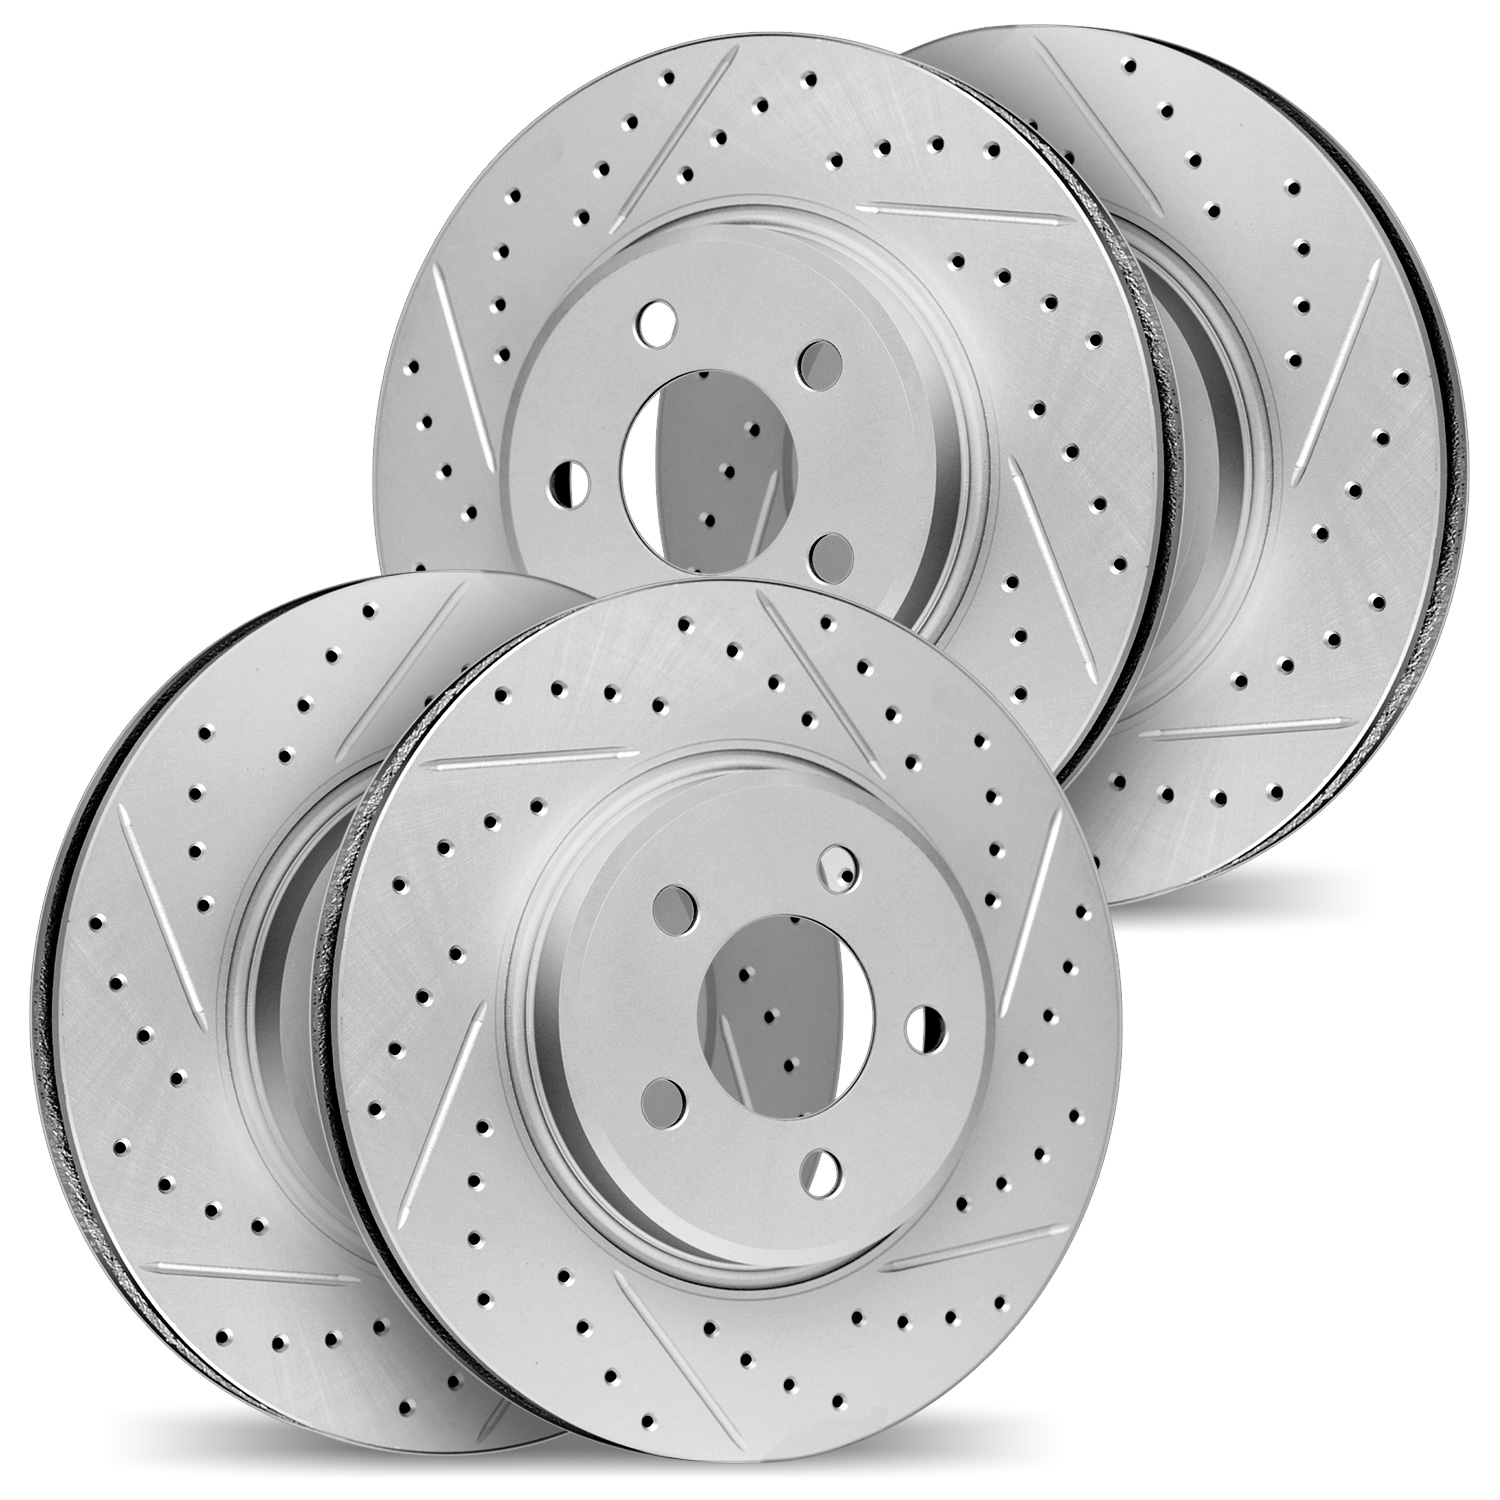 2004-02008 Geoperformance Drilled/Slotted Brake Rotors, 1987-1989 Porsche, Position: Front and Rear